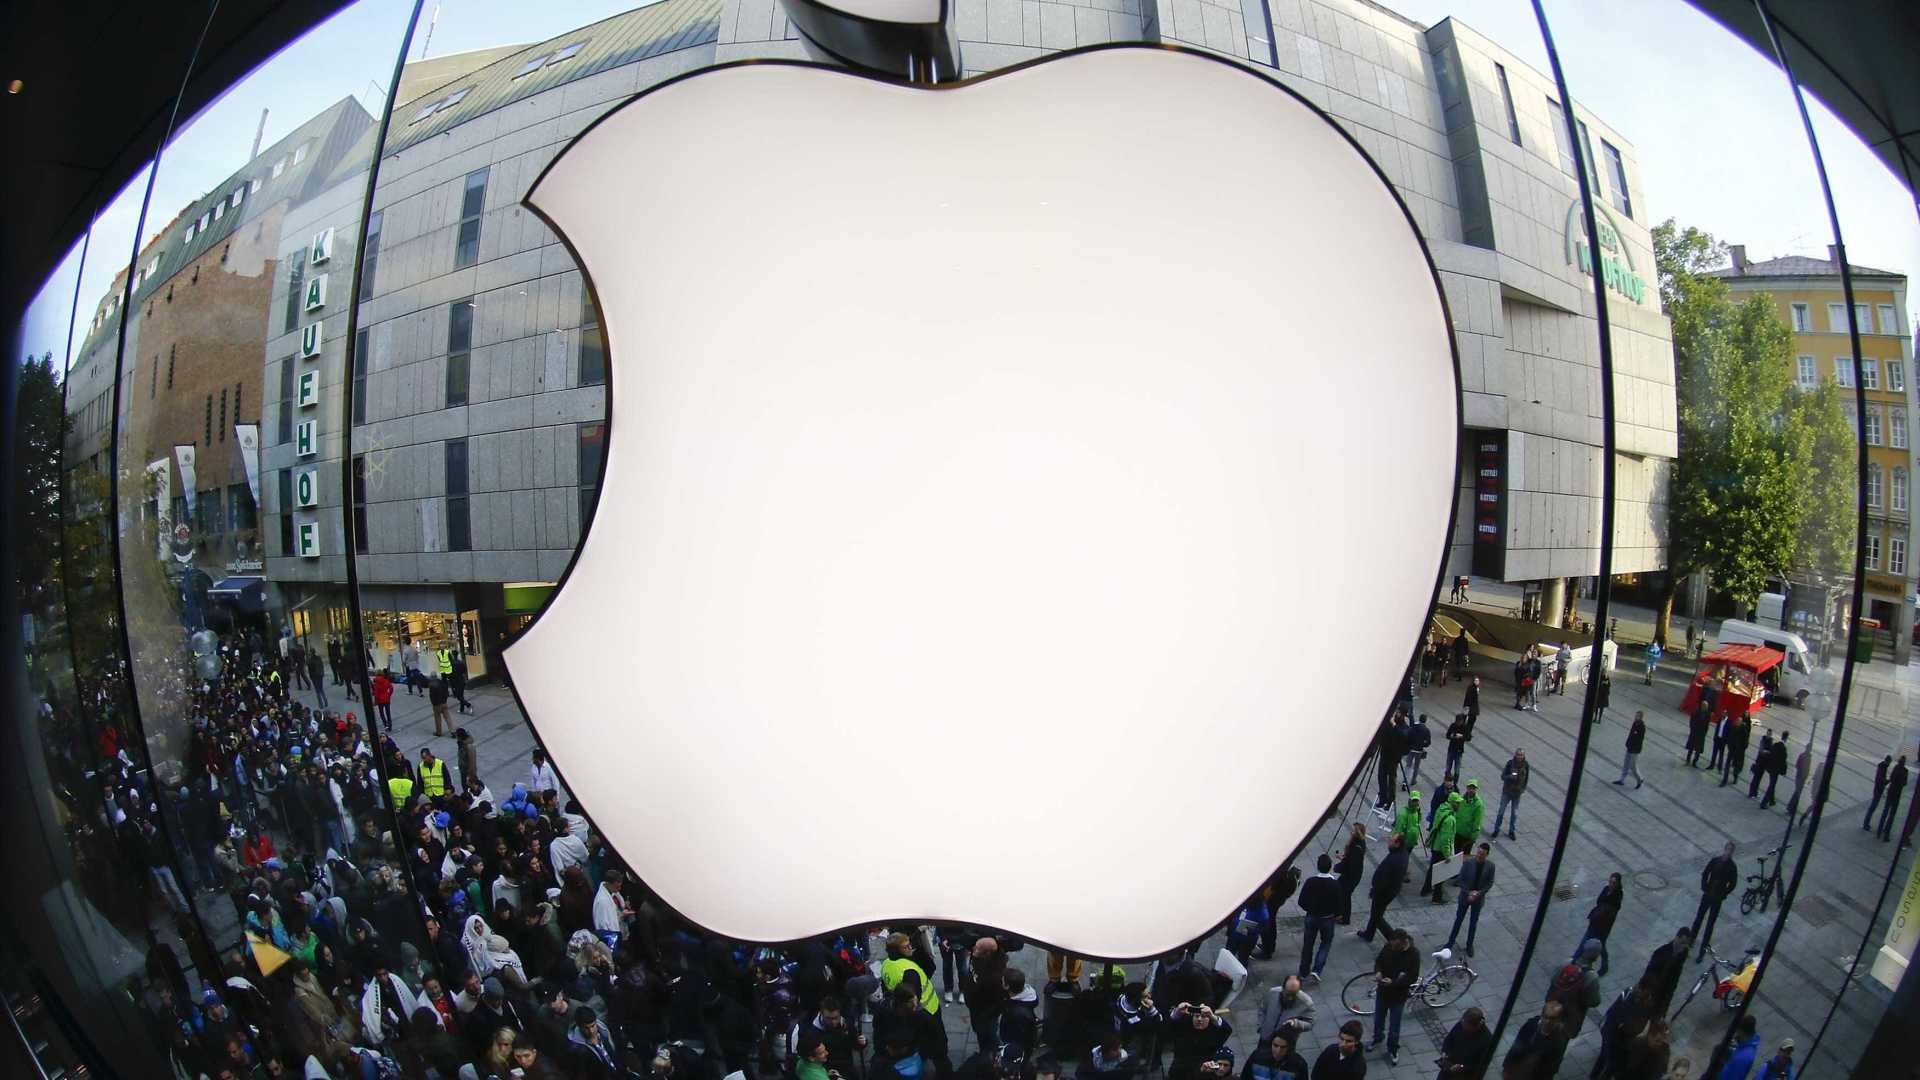 Apple is in 5th place in the ranking of companies with the highest number of billionaire employees